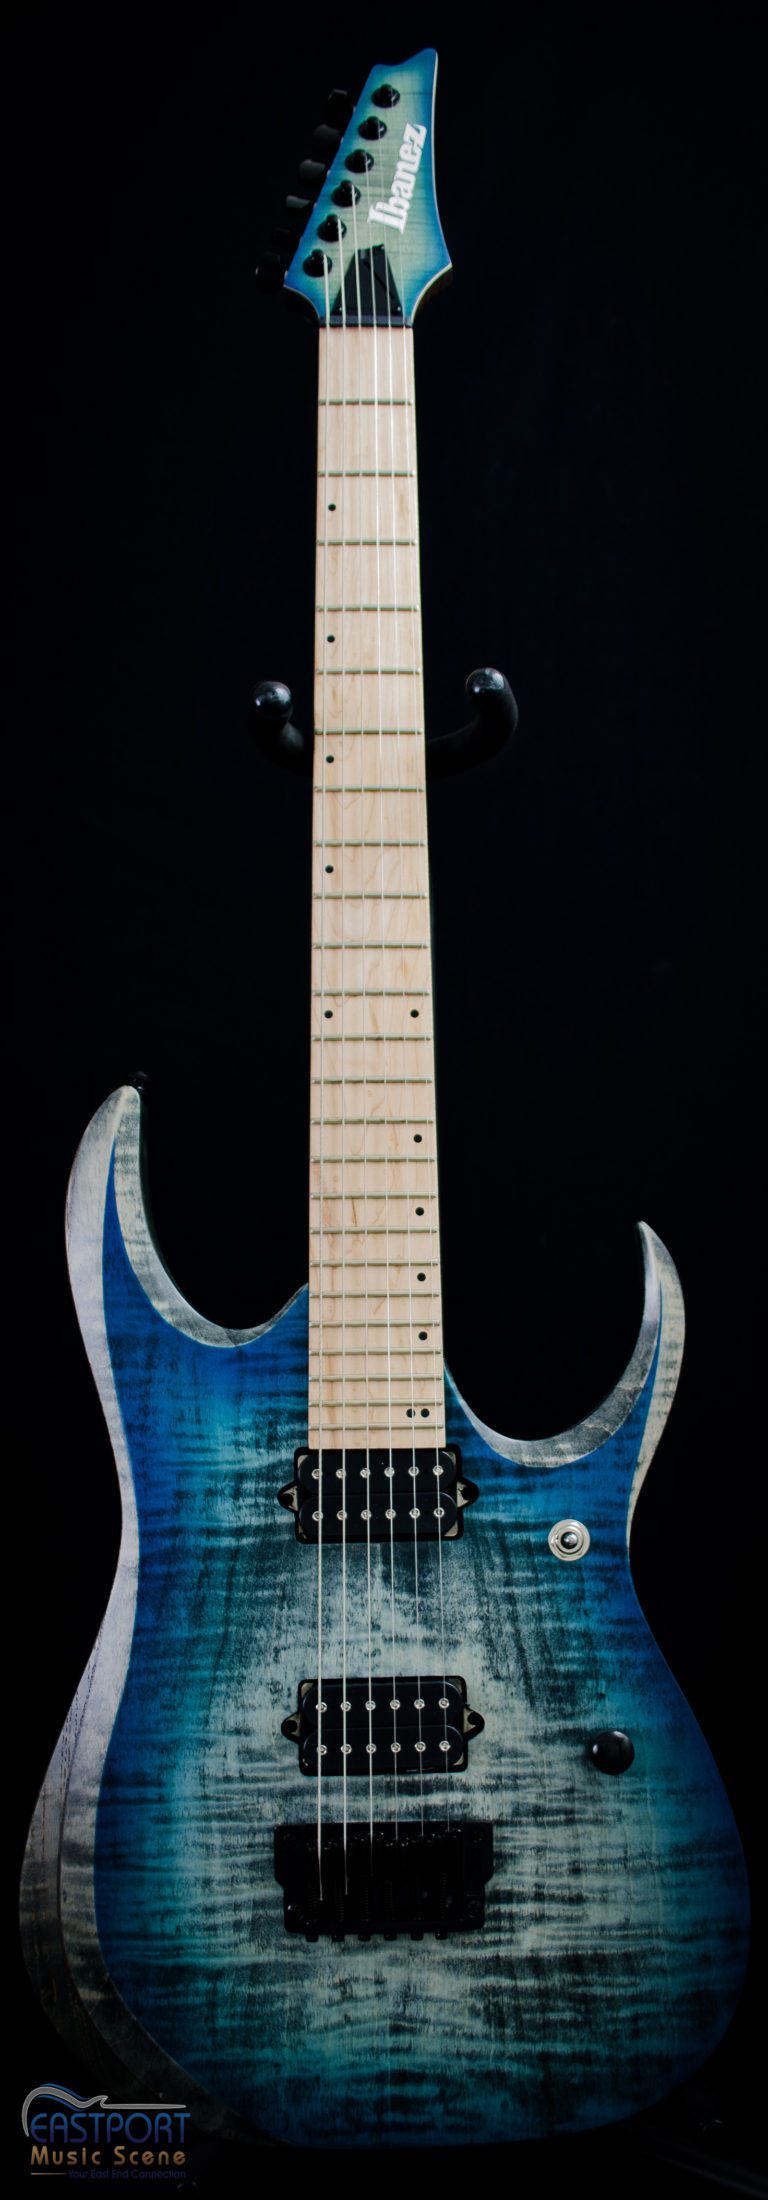 A blue electric guitar with white trim and black background